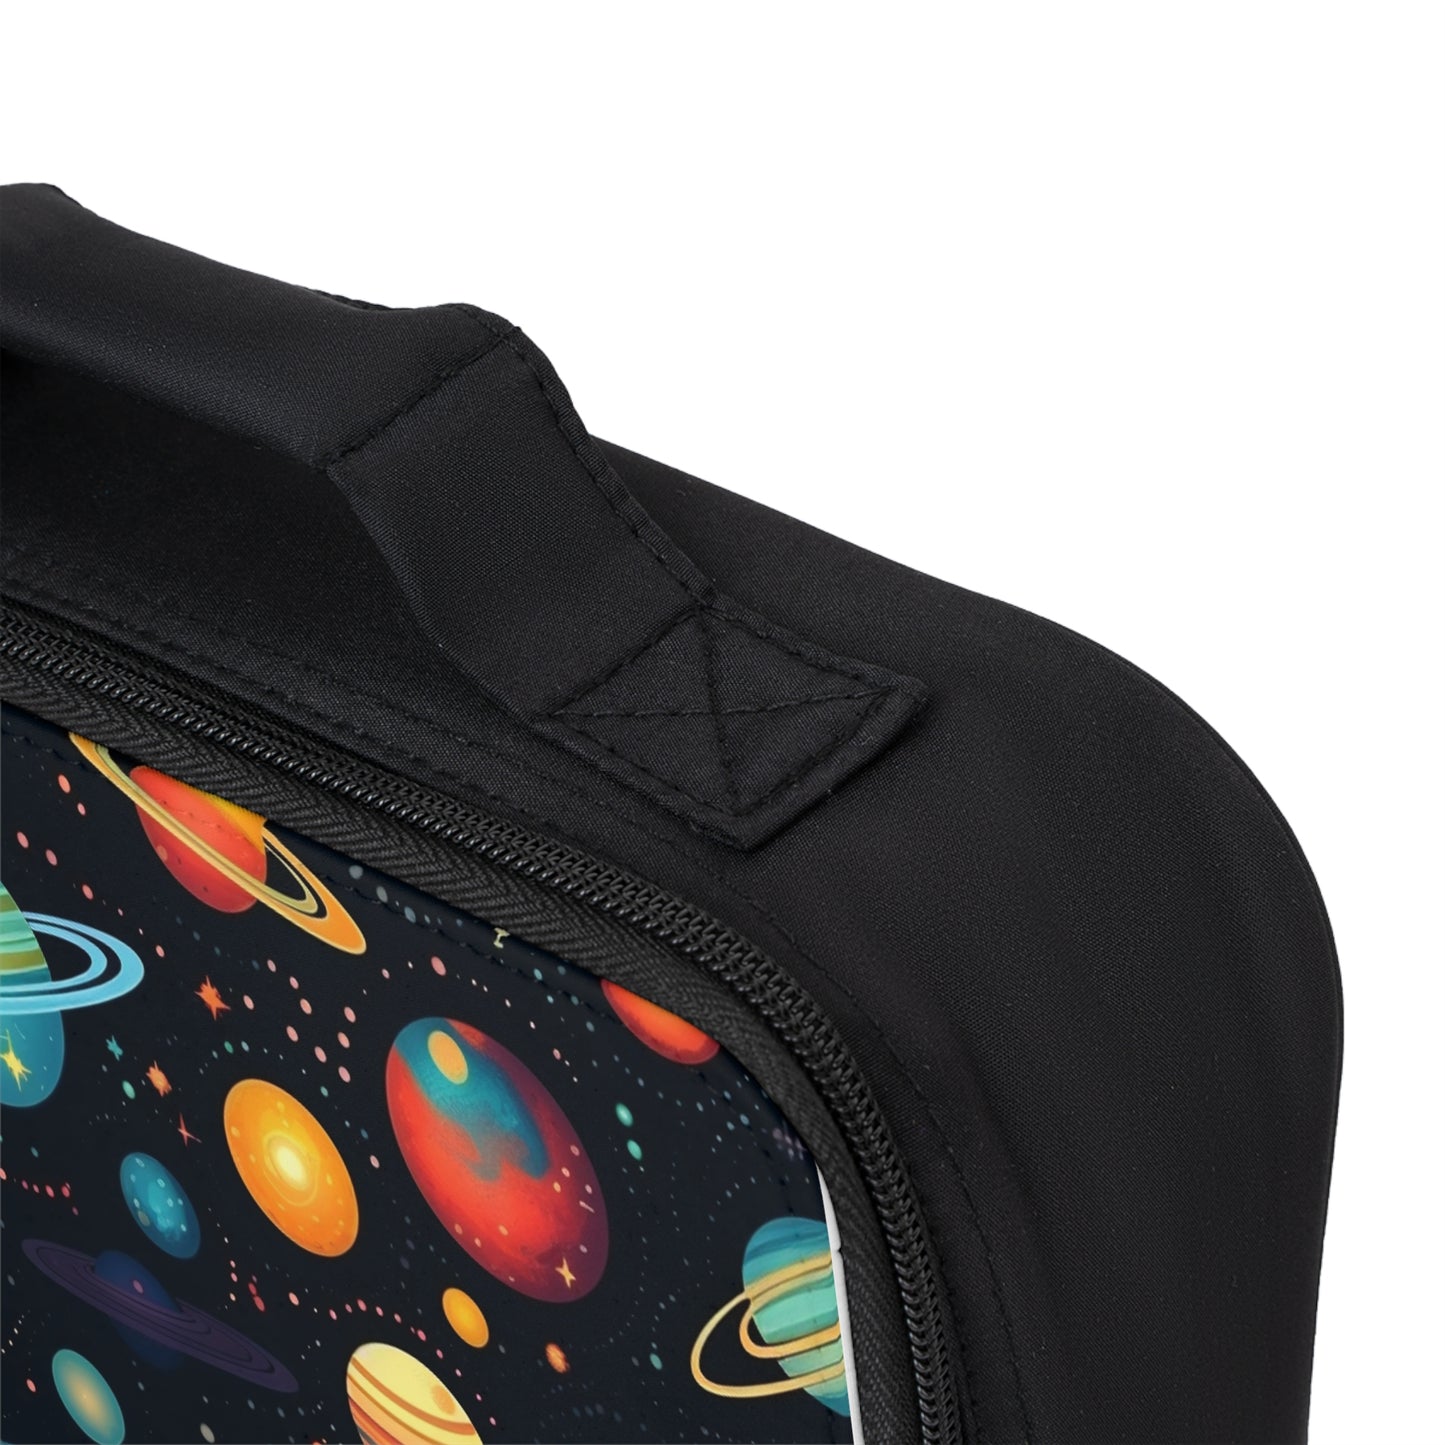 Celestial Saturn - Planets Zipper Lunch Bag | Cosmic Themed Accessories